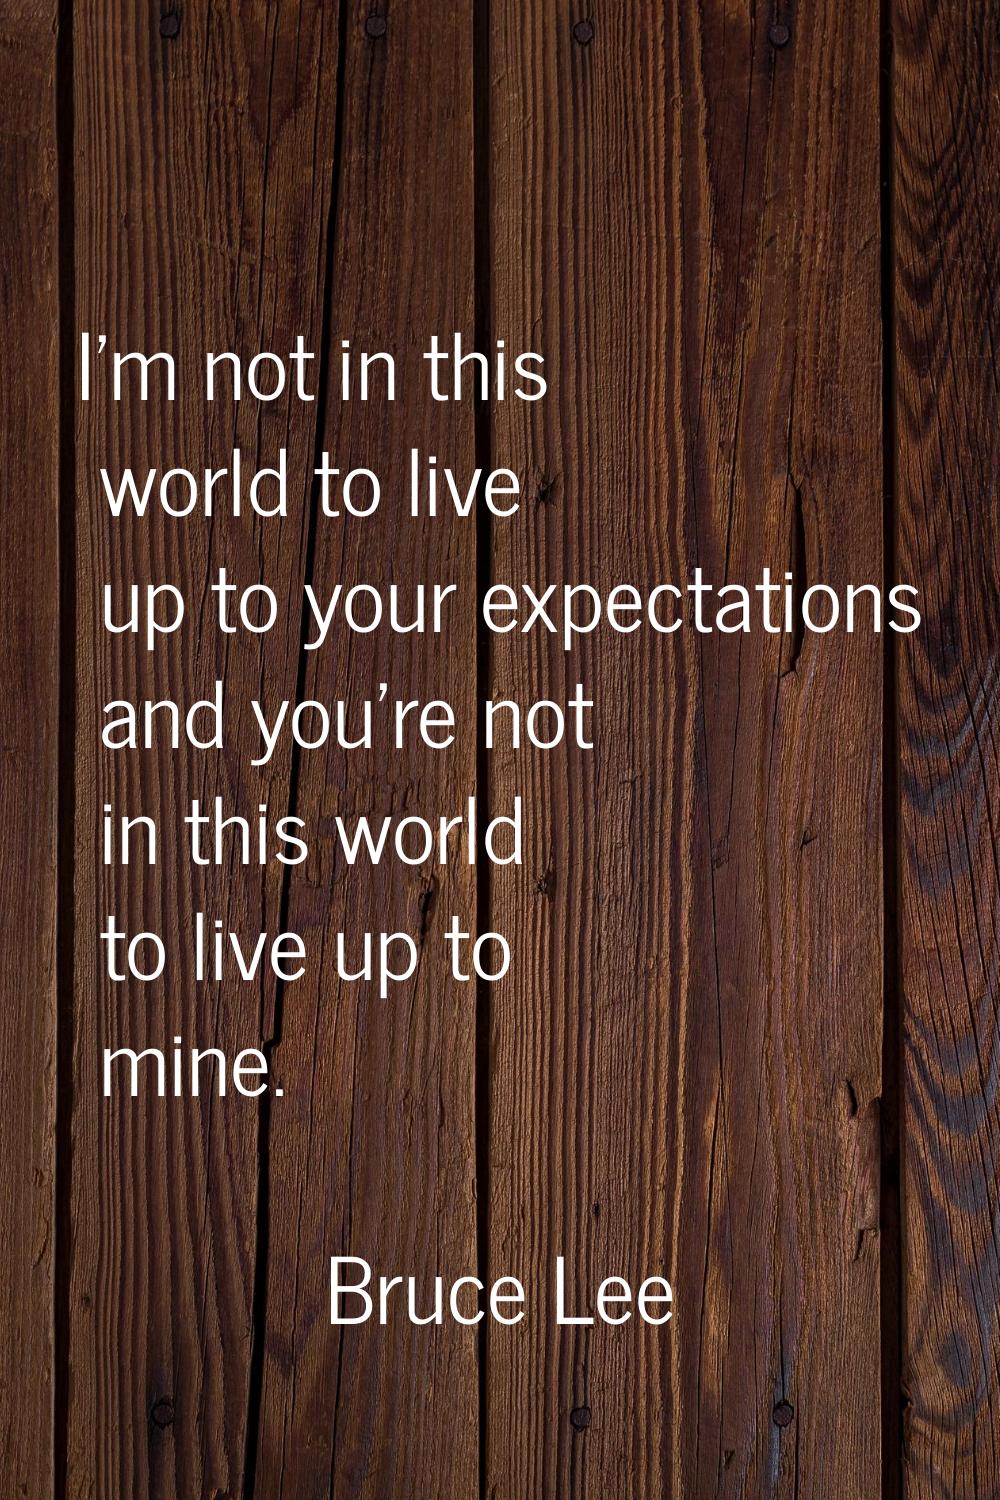 I'm not in this world to live up to your expectations and you're not in this world to live up to mi